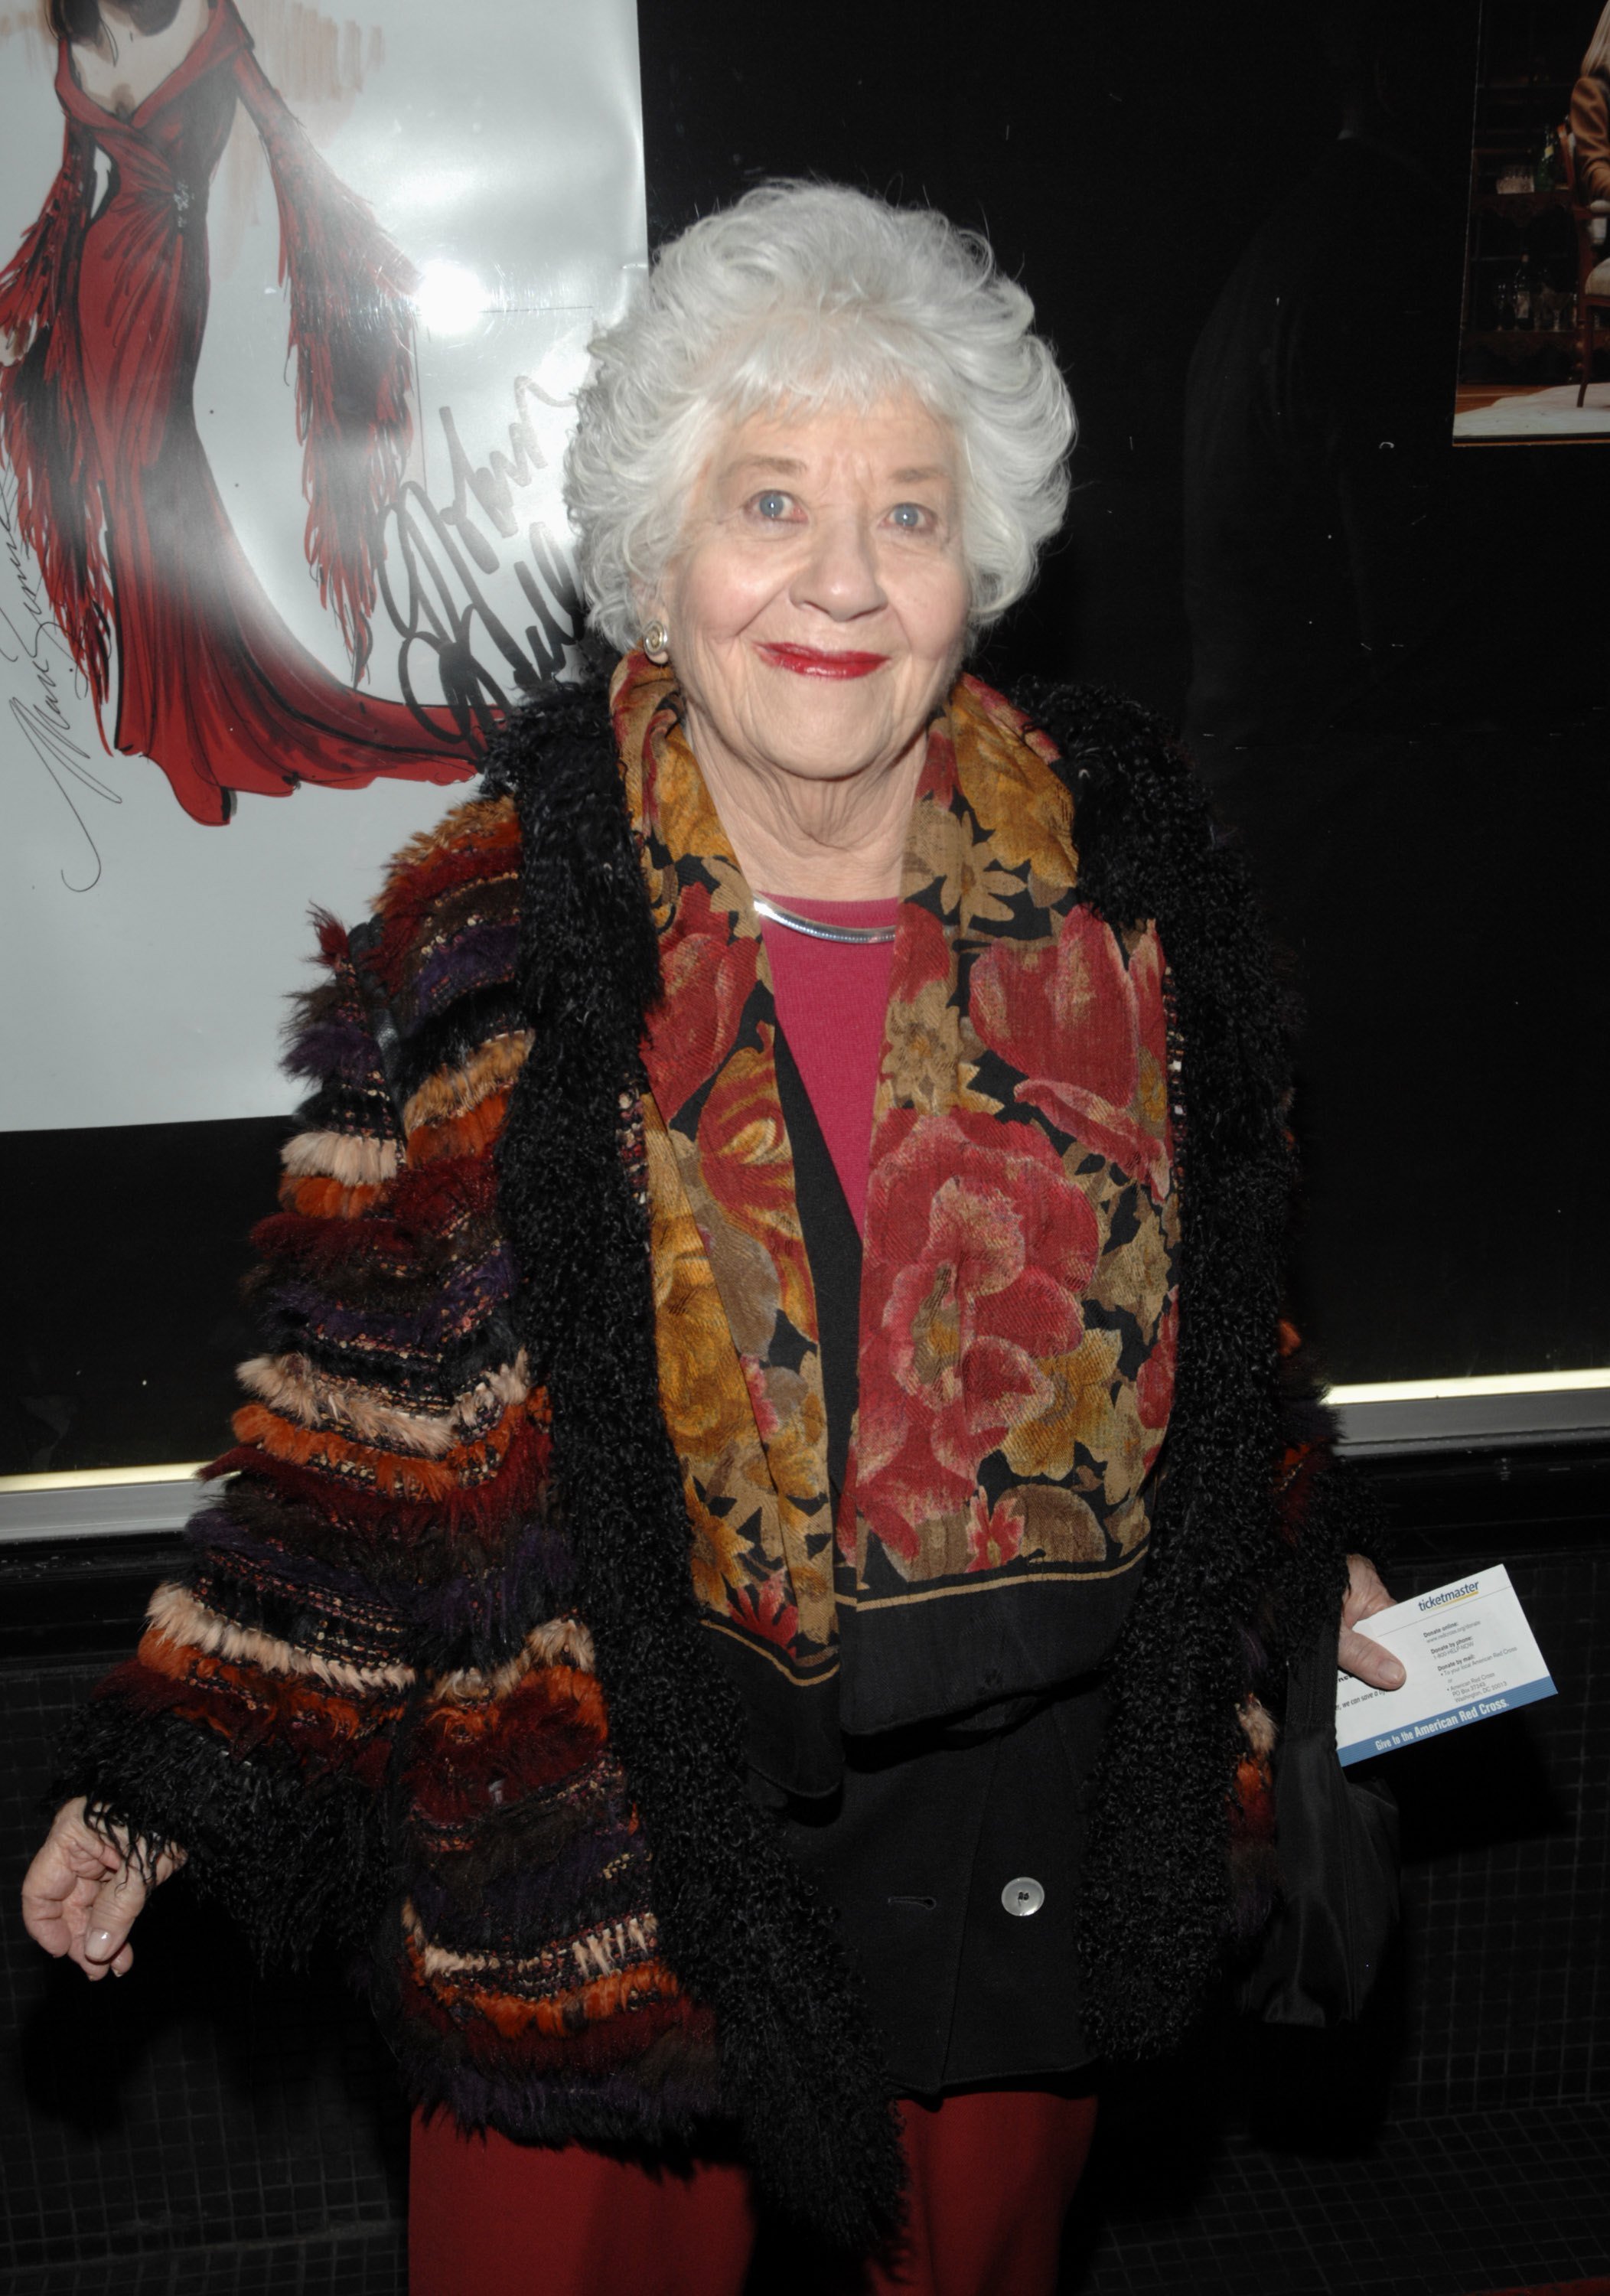  Charlotte Rae attends the "Legends" premiere of Joan Collins and Linda Evans on January 16, 2007 at the Wlishire Theatre in Beverly Hills, California. | Photo: Getty Images